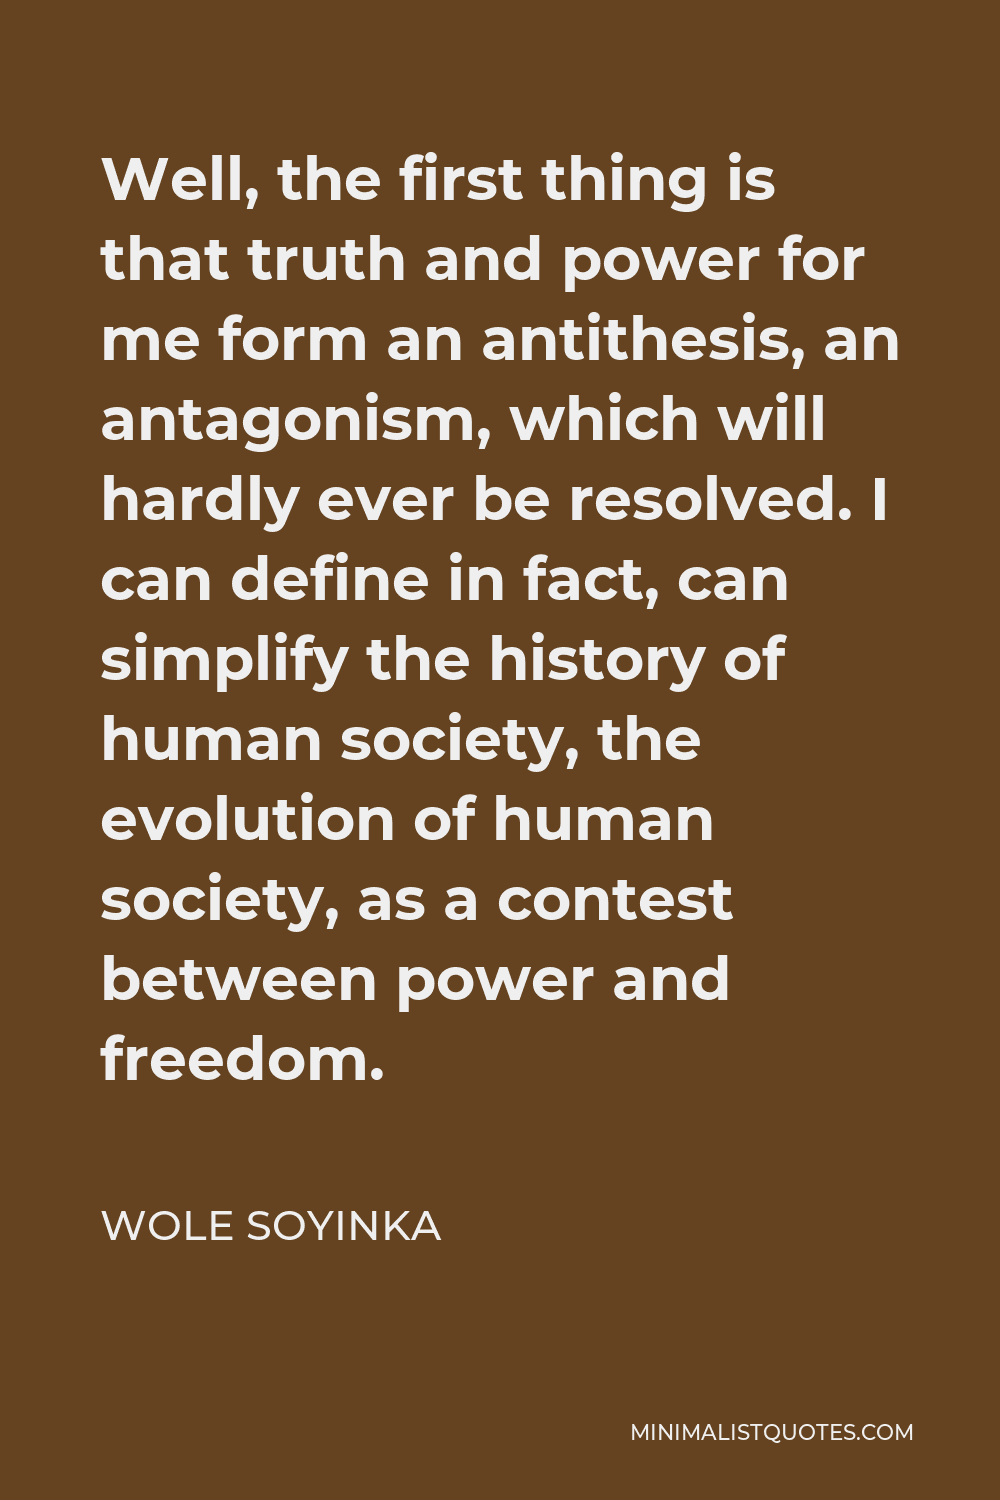 Wole Soyinka Quote - Well, the first thing is that truth and power for me form an antithesis, an antagonism, which will hardly ever be resolved. I can define in fact, can simplify the history of human society, the evolution of human society, as a contest between power and freedom.